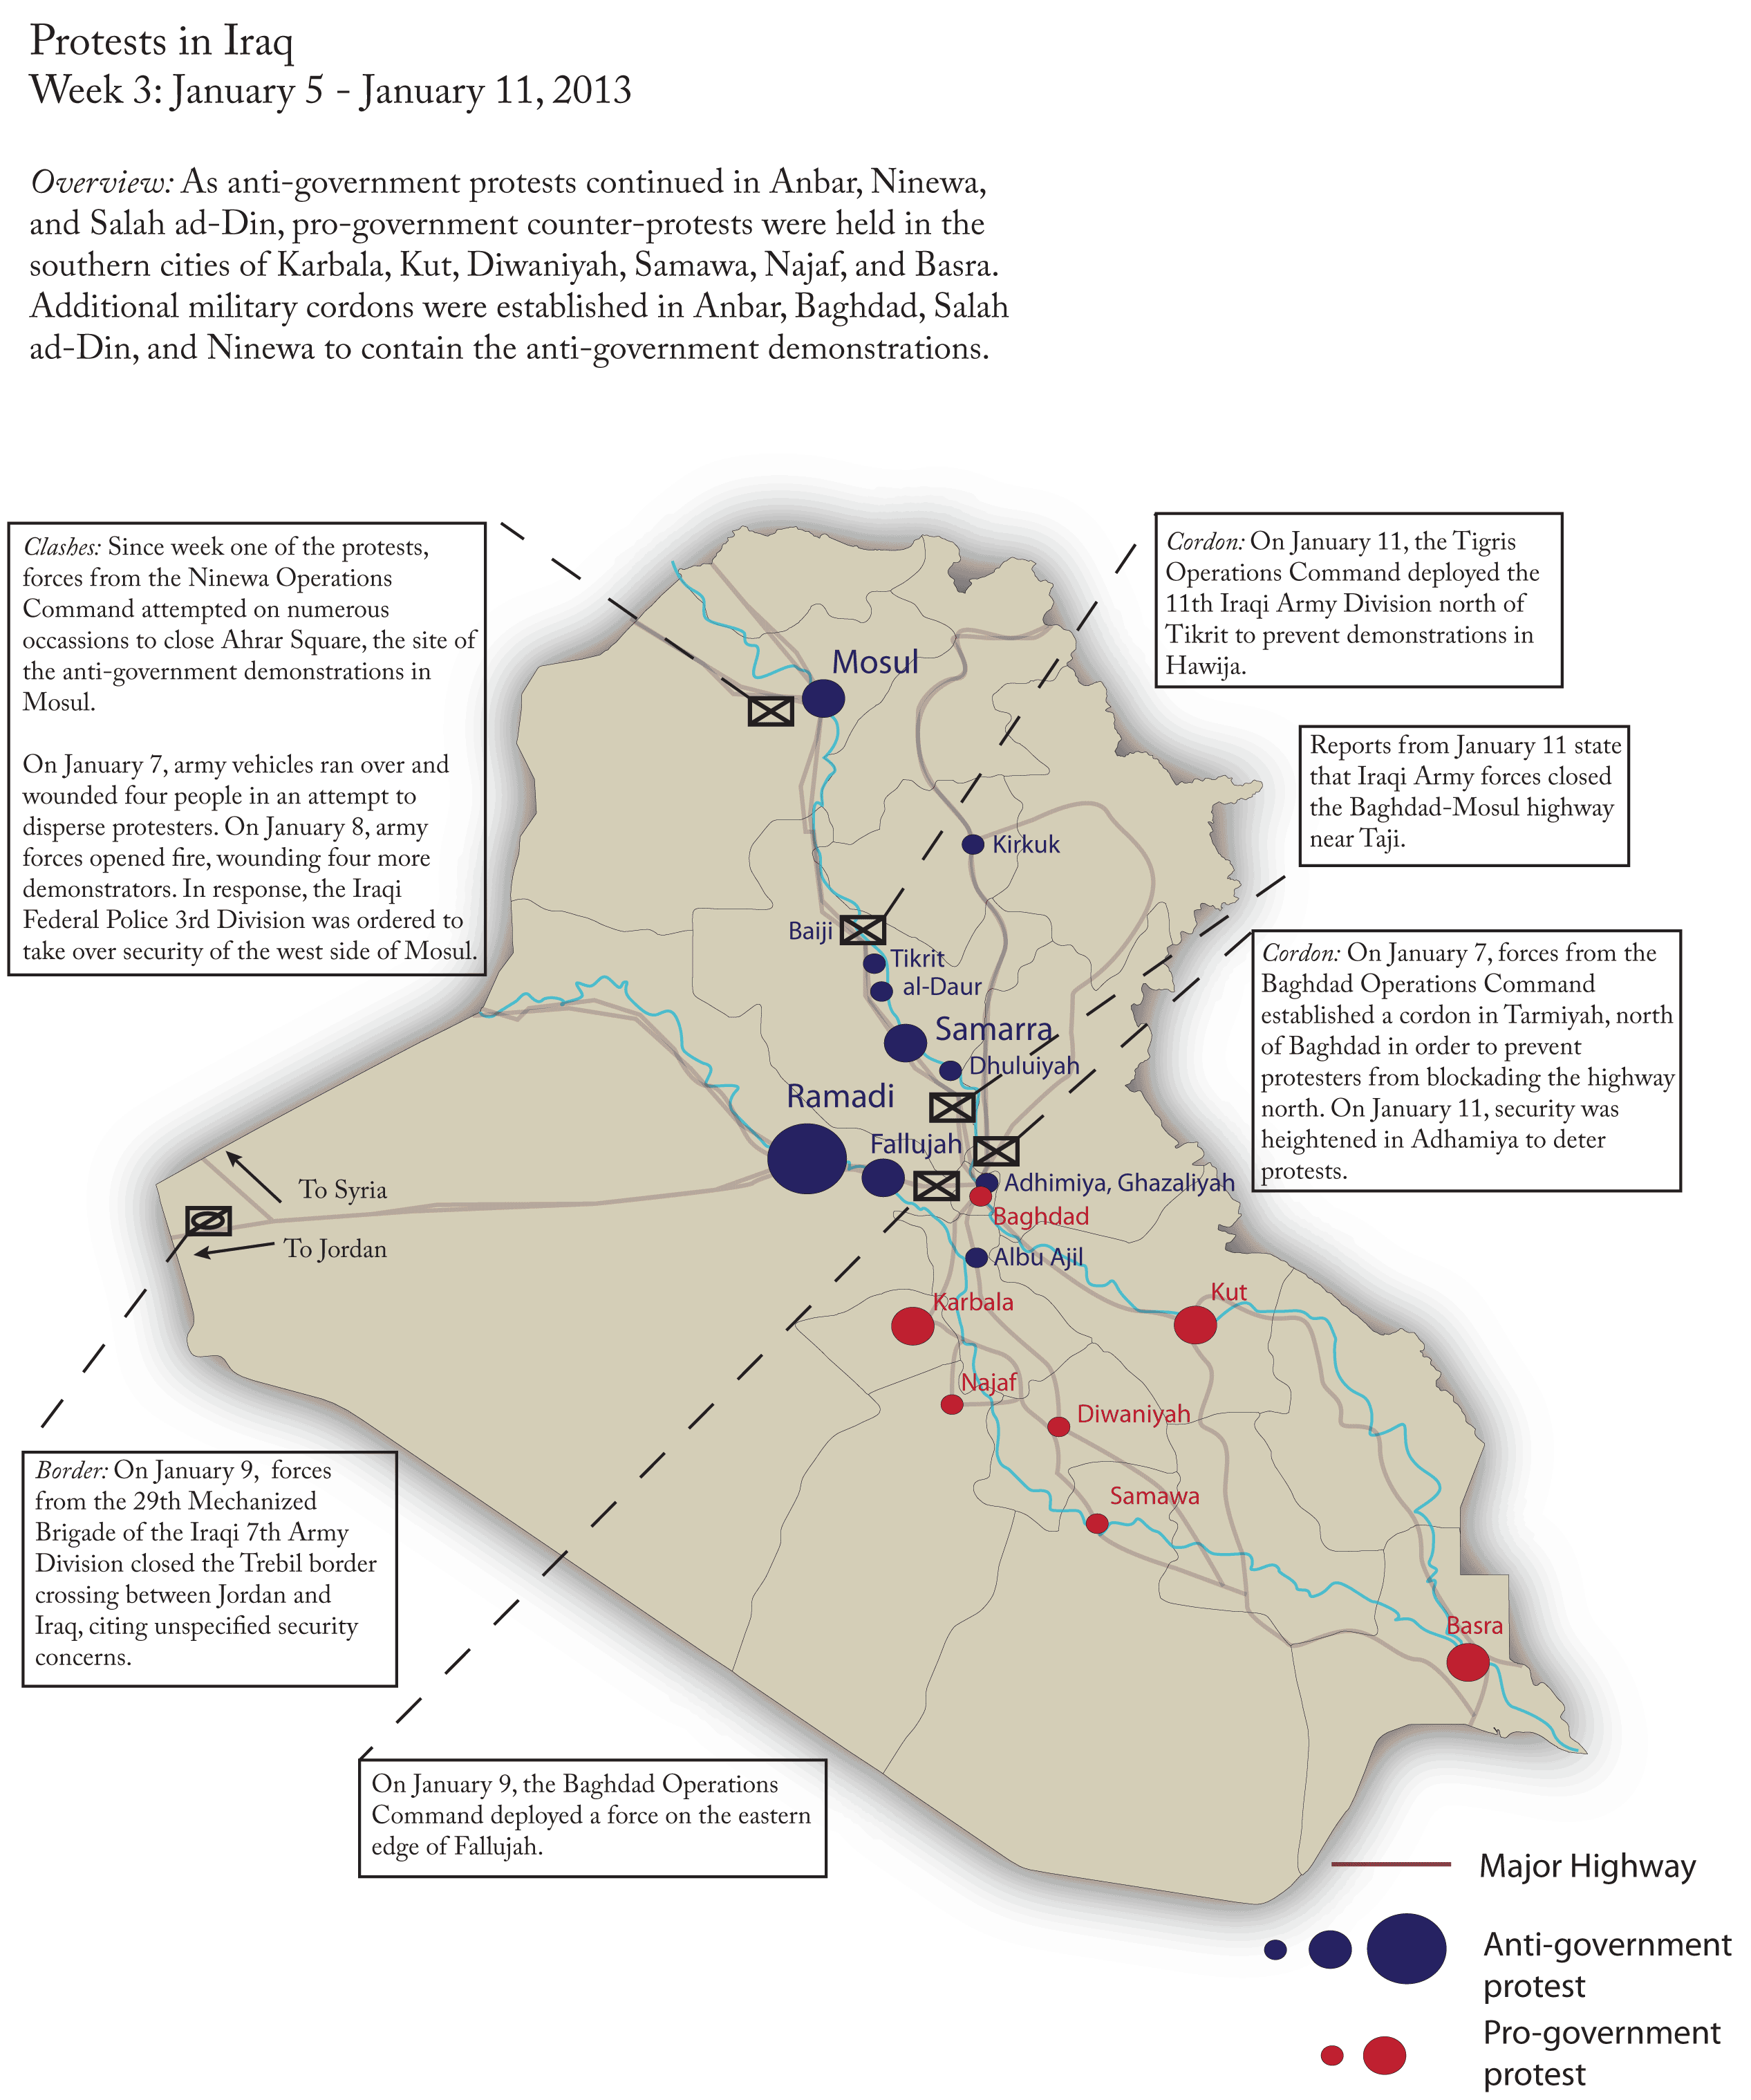 Protests in Iraq January 5-January 11, 2013